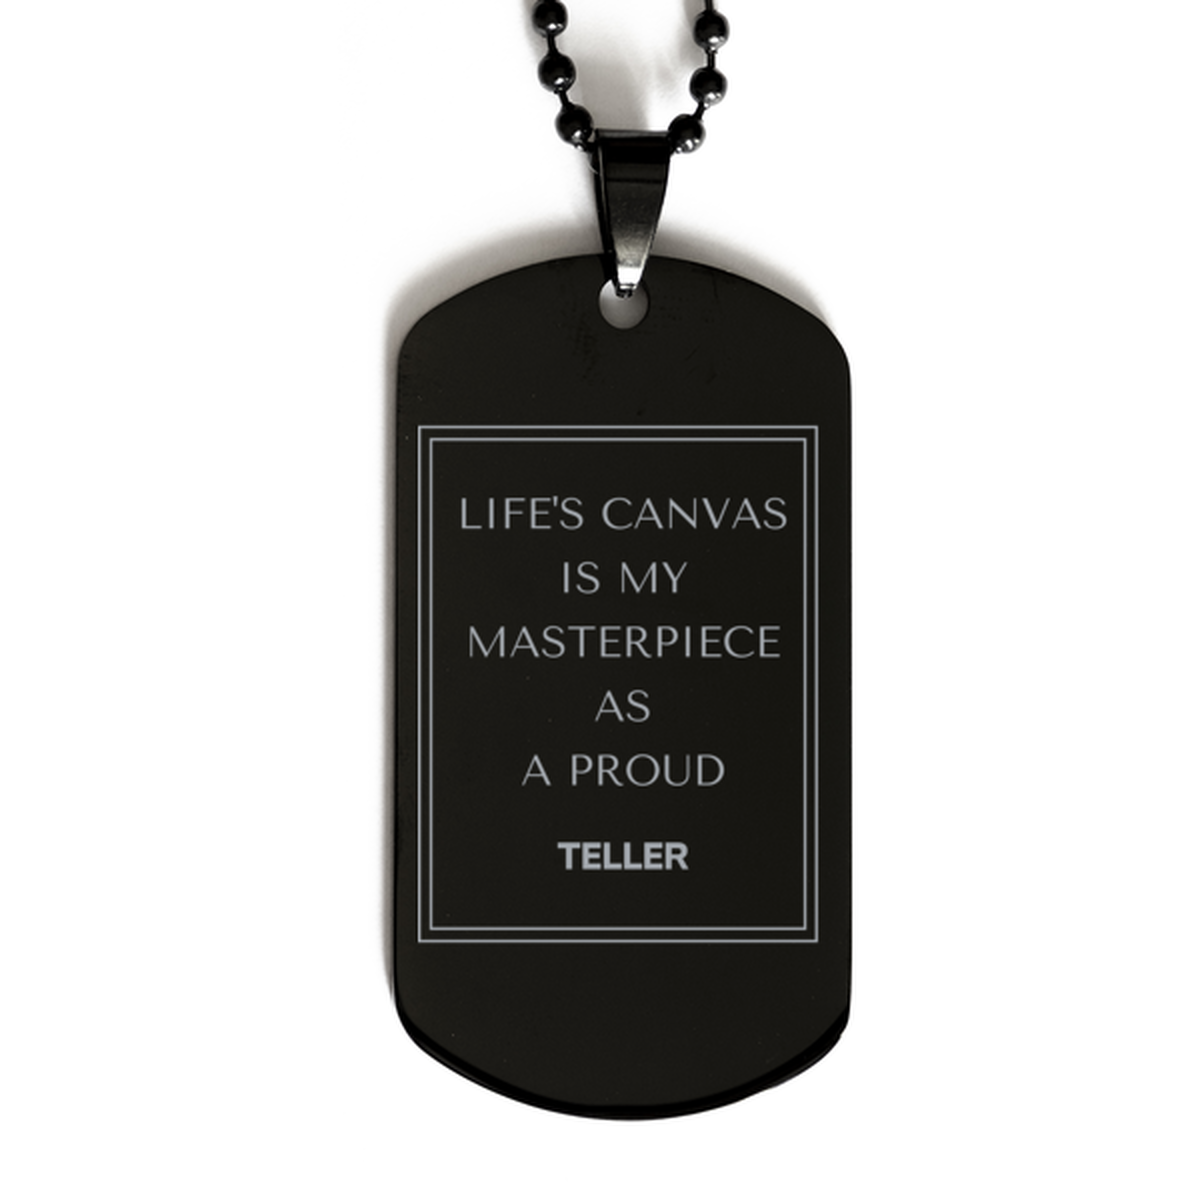 Proud Teller Gifts, Life's canvas is my masterpiece, Epic Birthday Christmas Unique Black Dog Tag For Teller, Coworkers, Men, Women, Friends